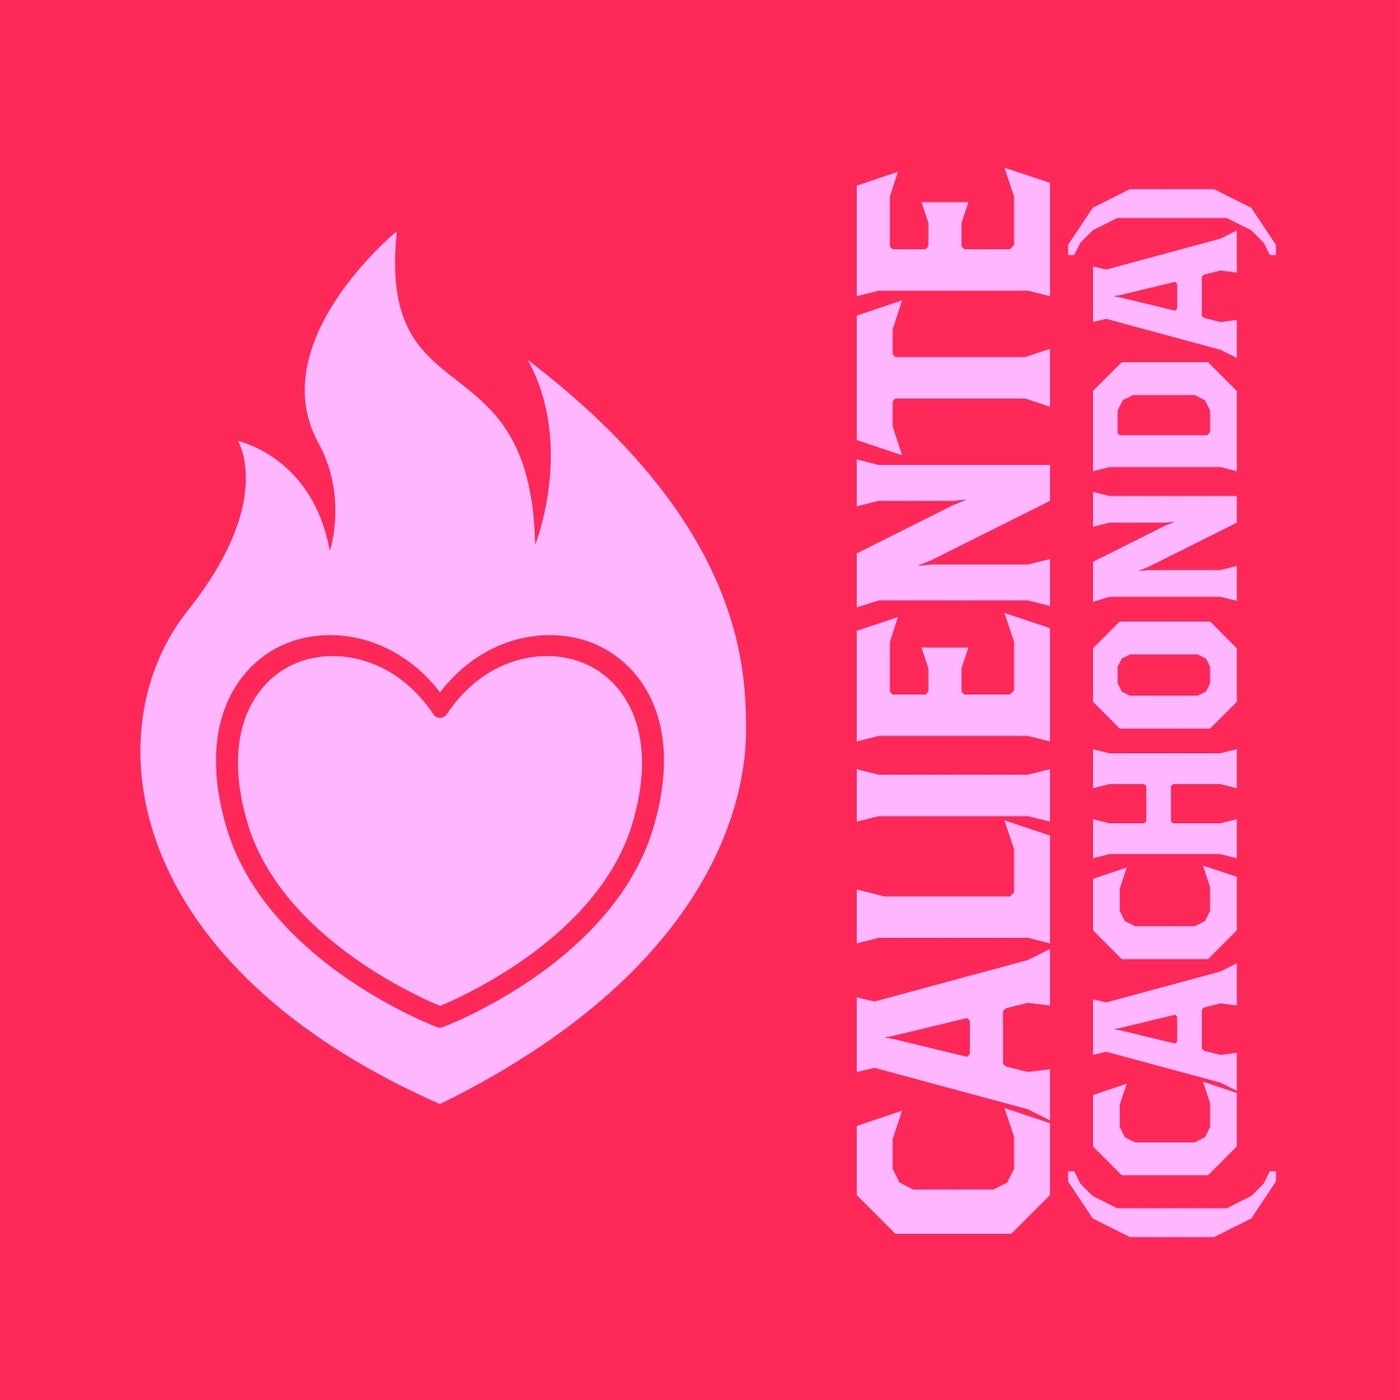 Release Cover: Caliente (Cachonda) Download Free on Electrobuzz